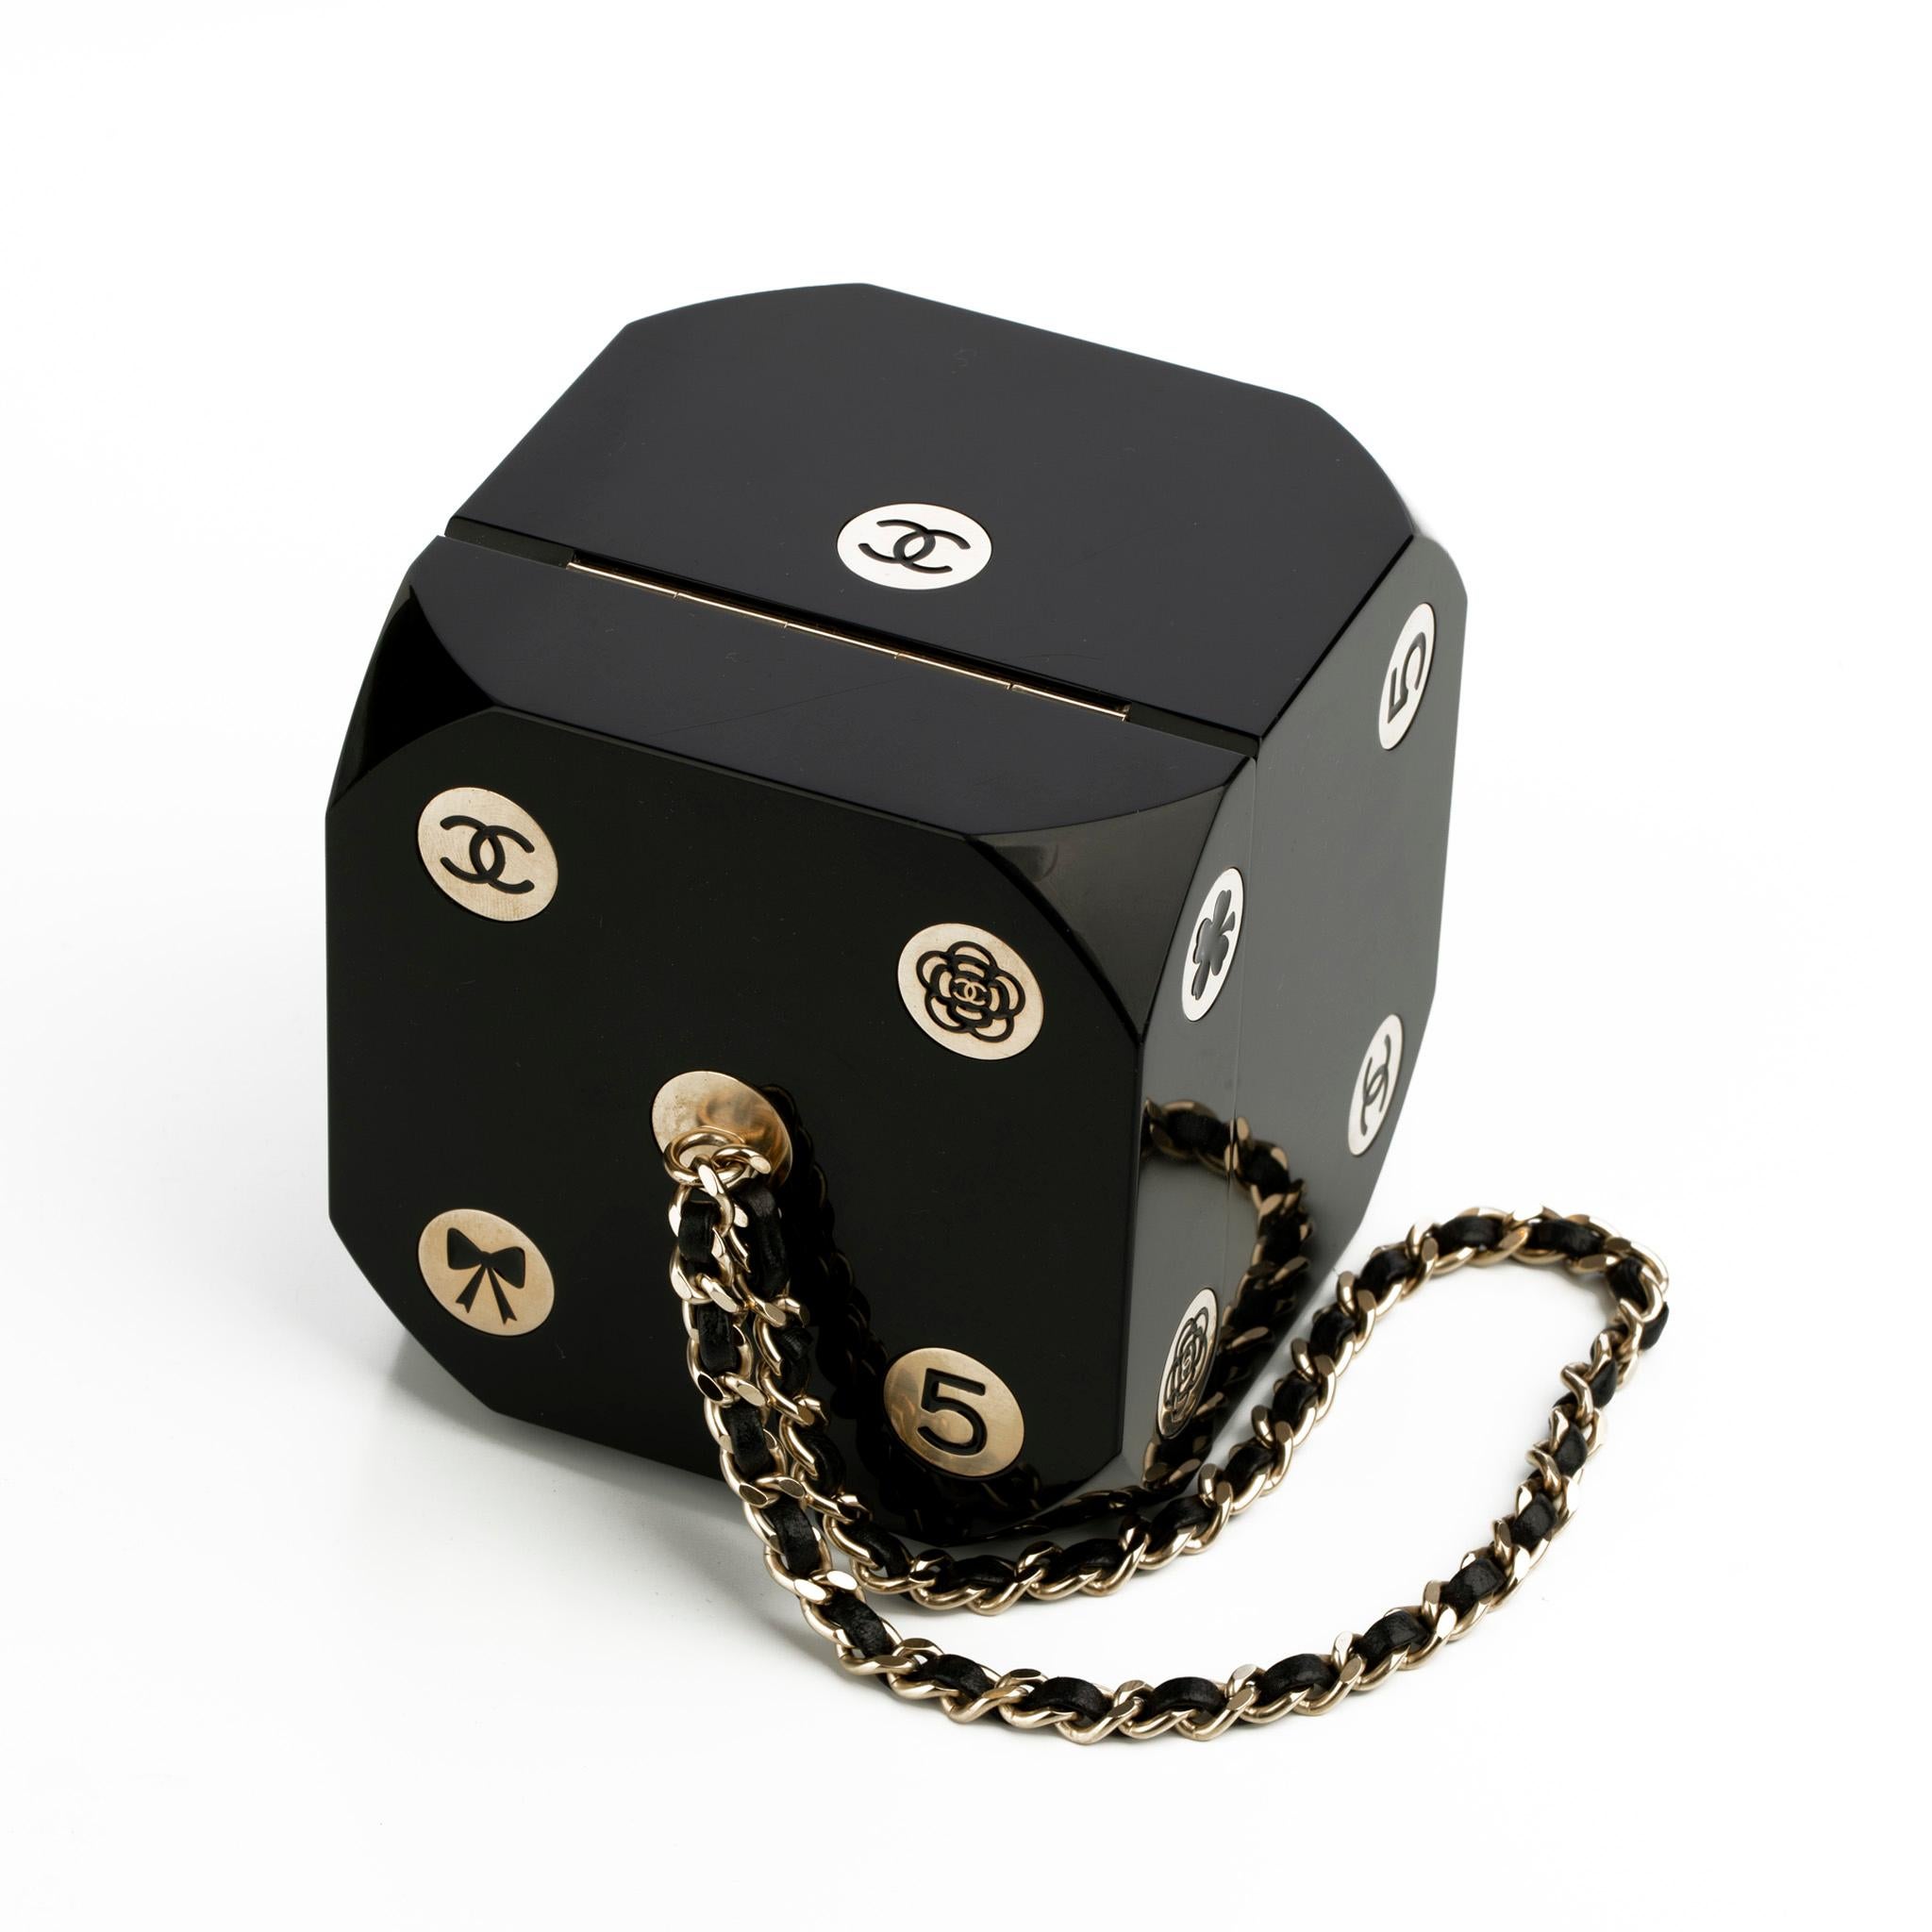 Chanel Minaudière Limited Edition Casino Dice Black Gold-Tone Hardware For Sale 5